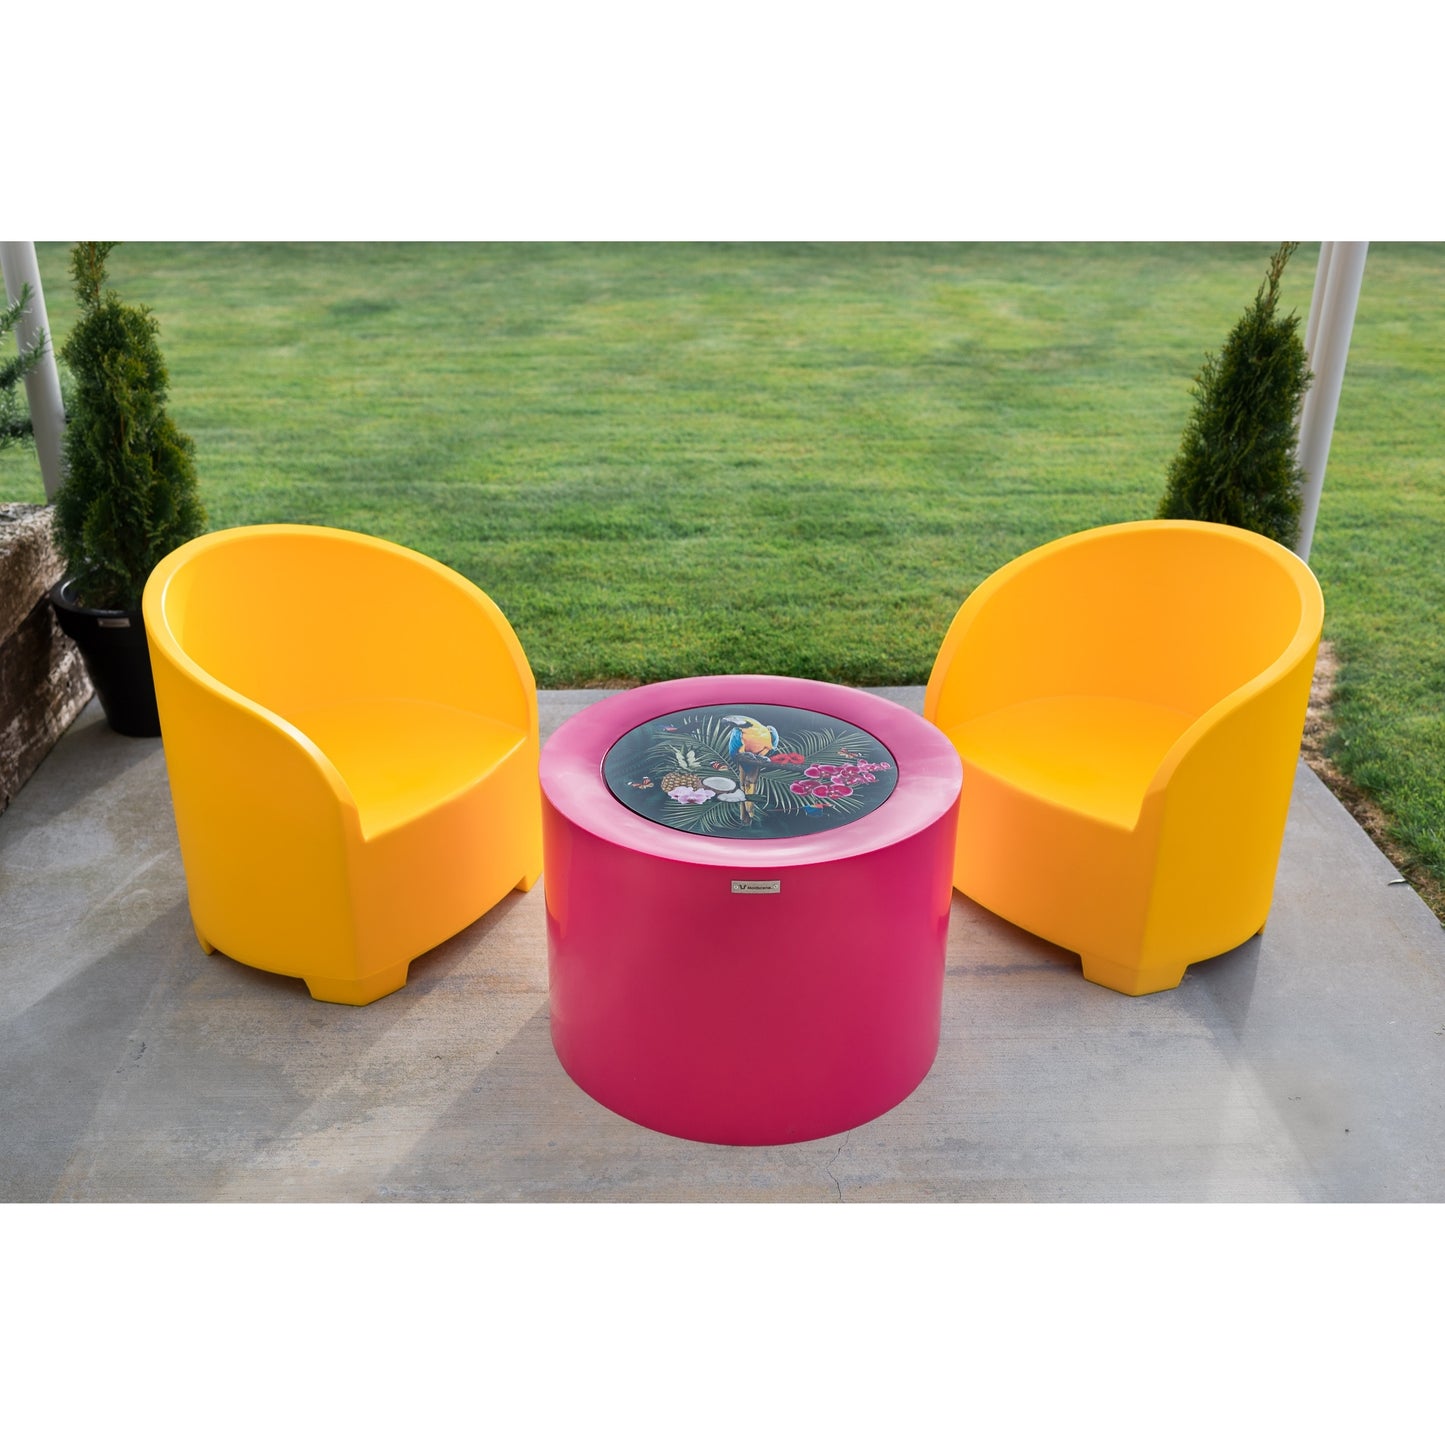 A yellow and pink outdoor furniture set designed by Modscene New Zealand.